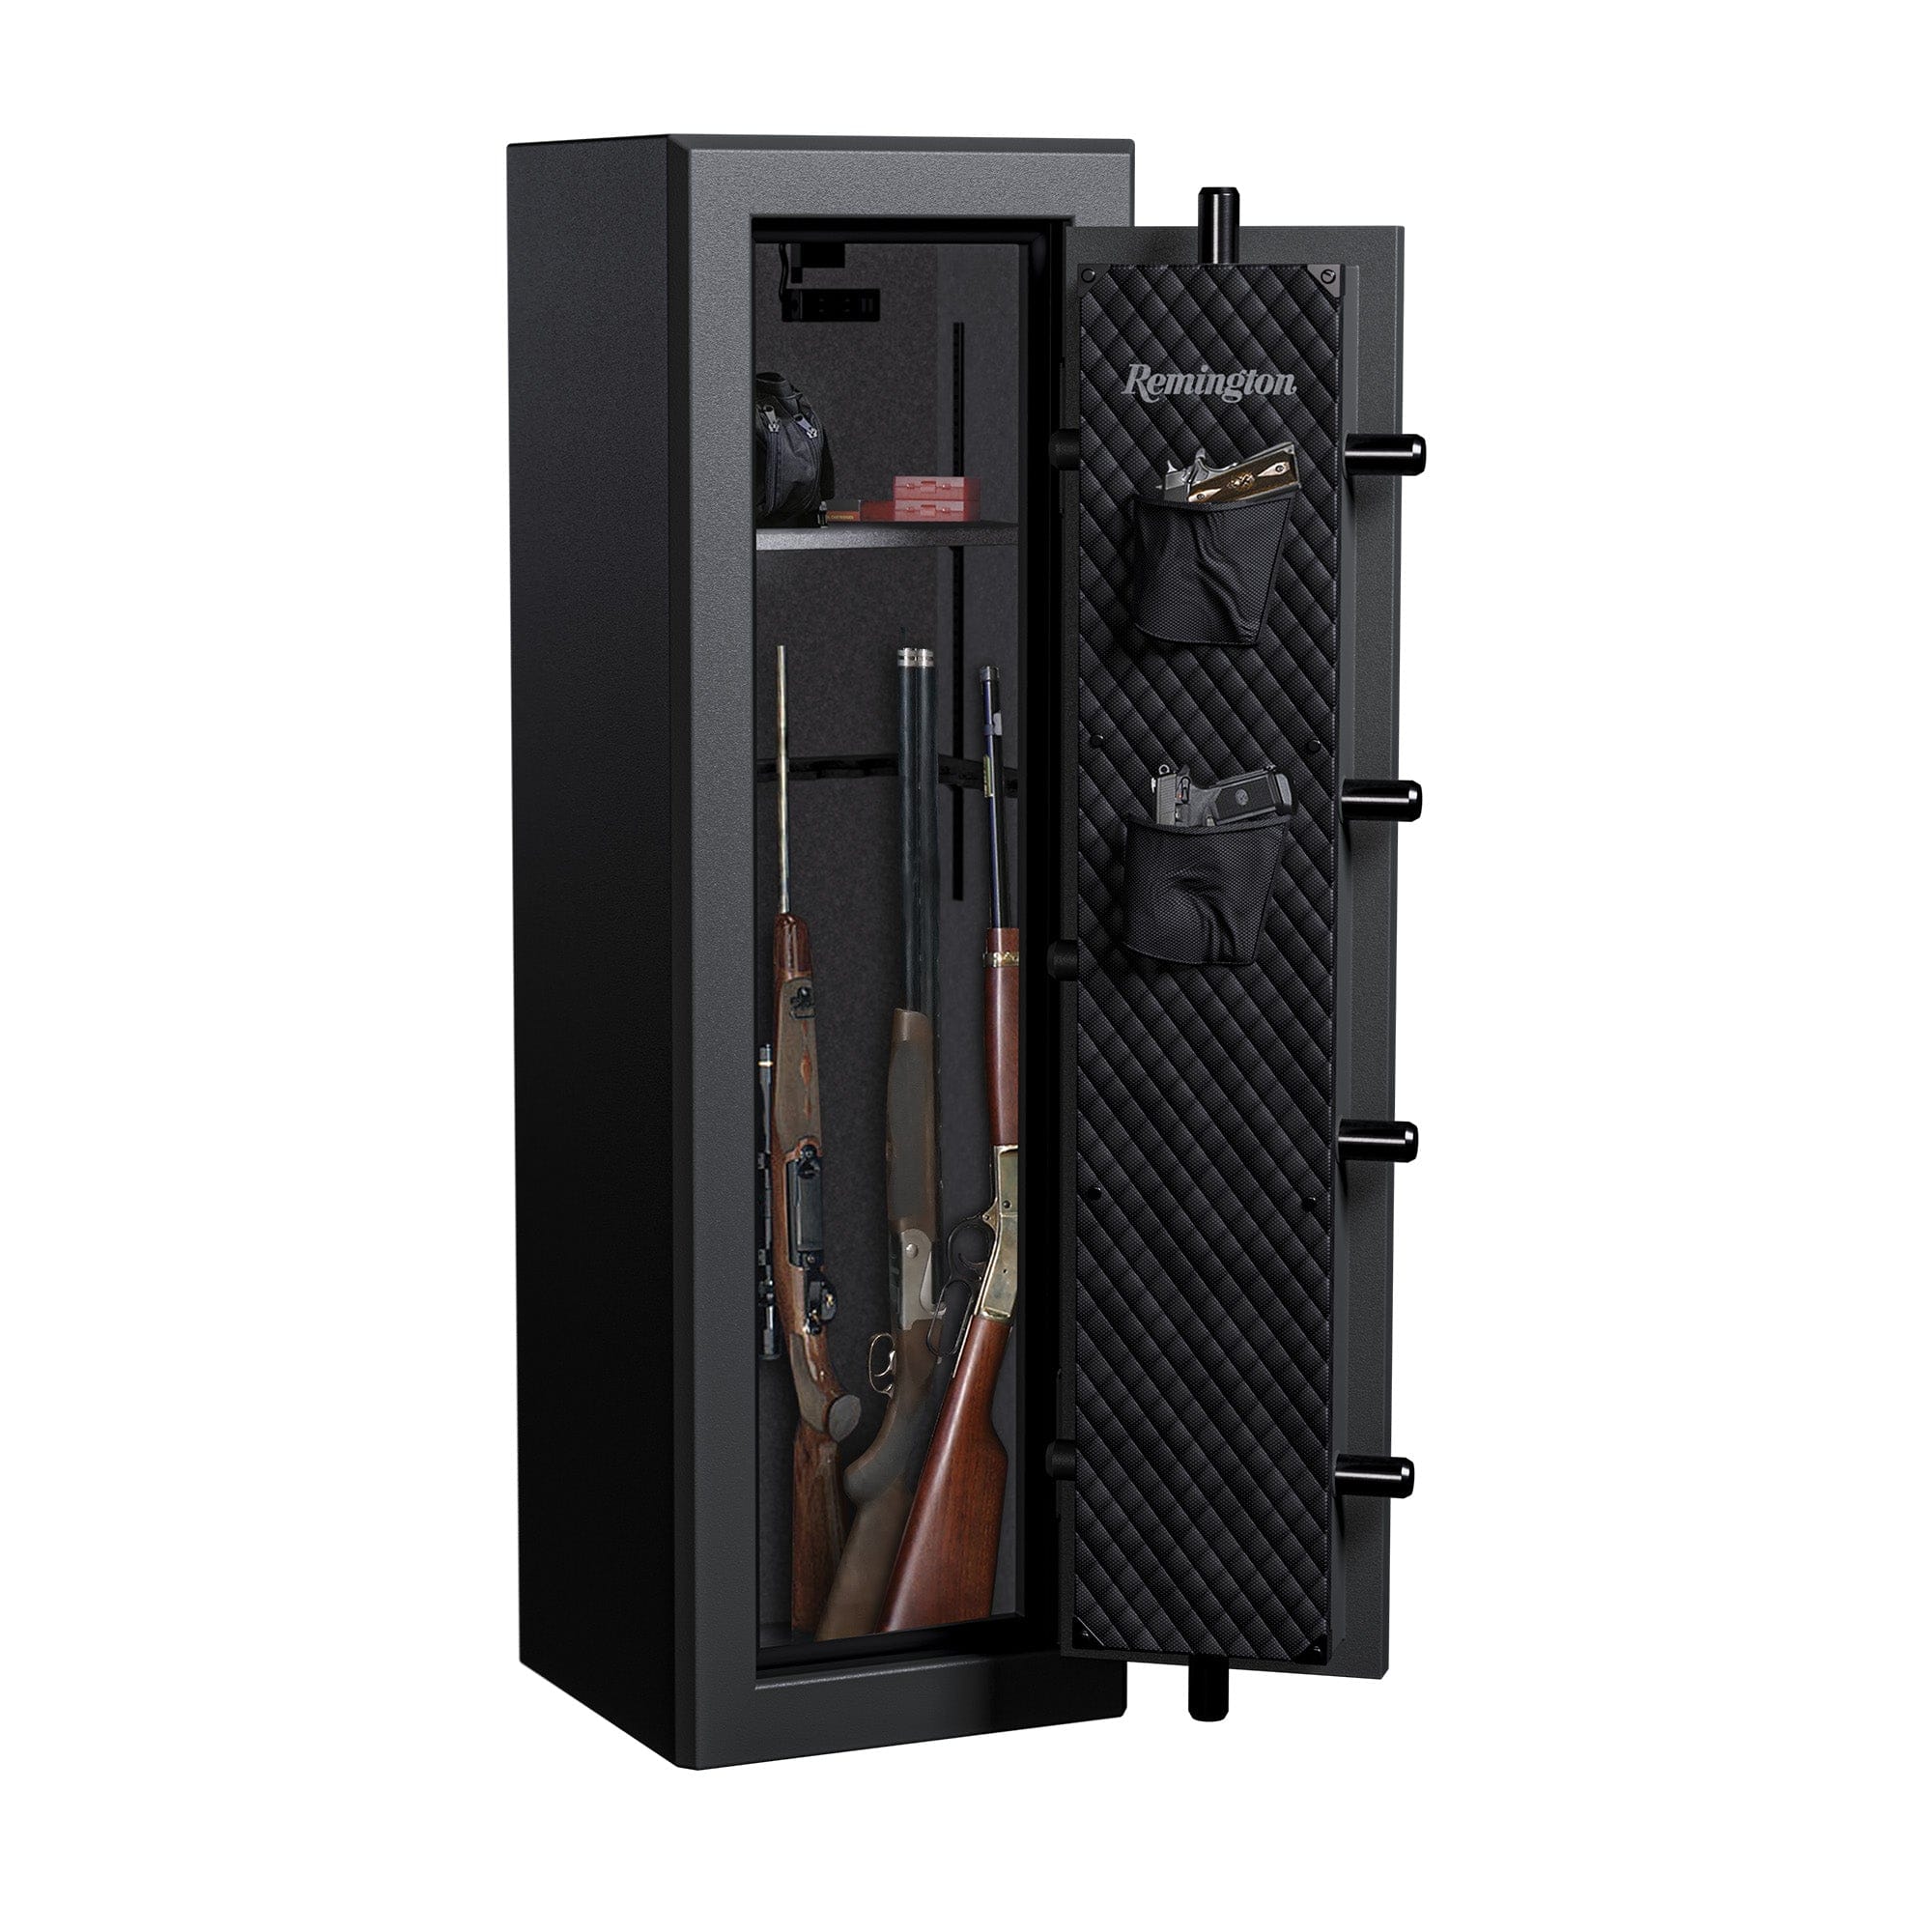 Remington GUN CLUB SERIES - 12-GUN SAFE SAR5912GC open with items inside such as hunting equipment, ammo boxes. 